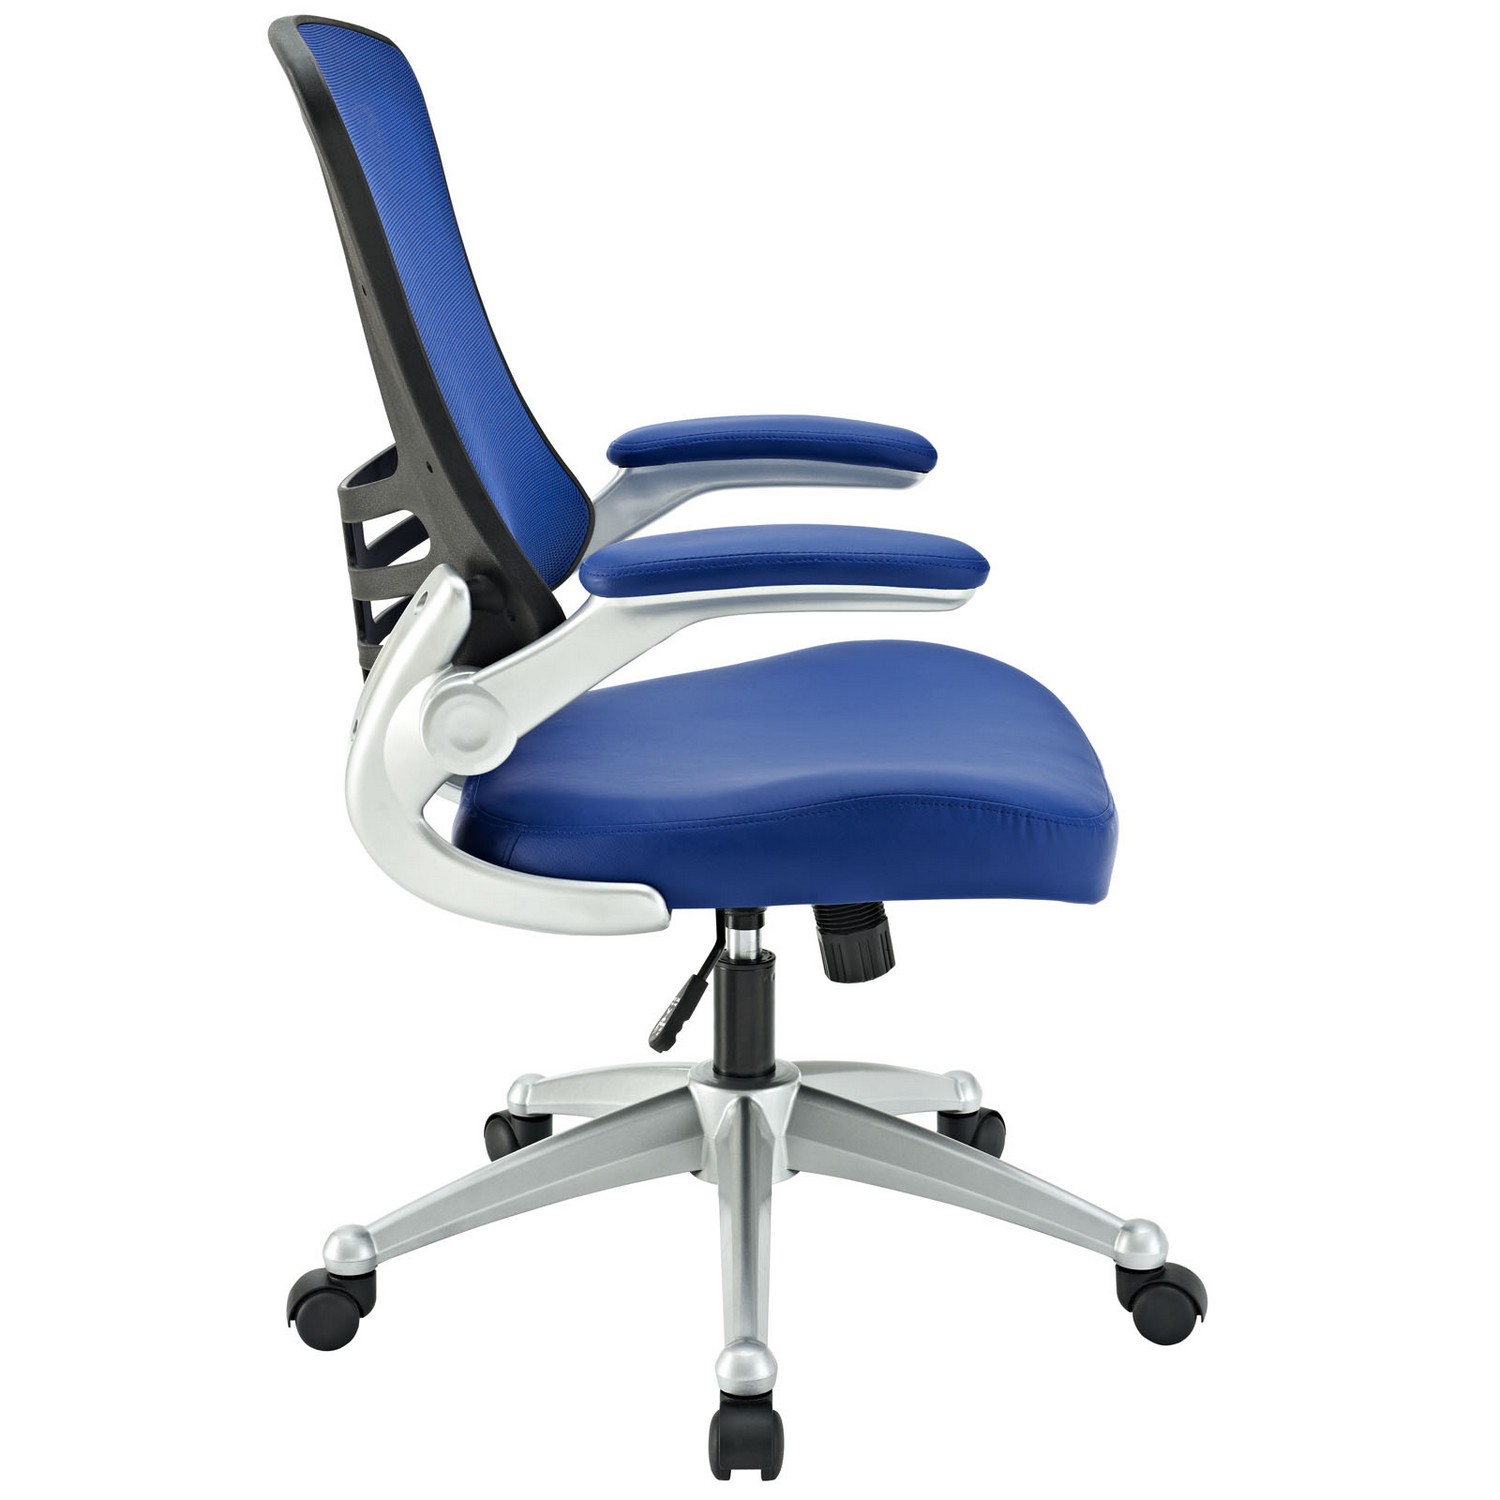 Modway Attainment Office Chair - Blue